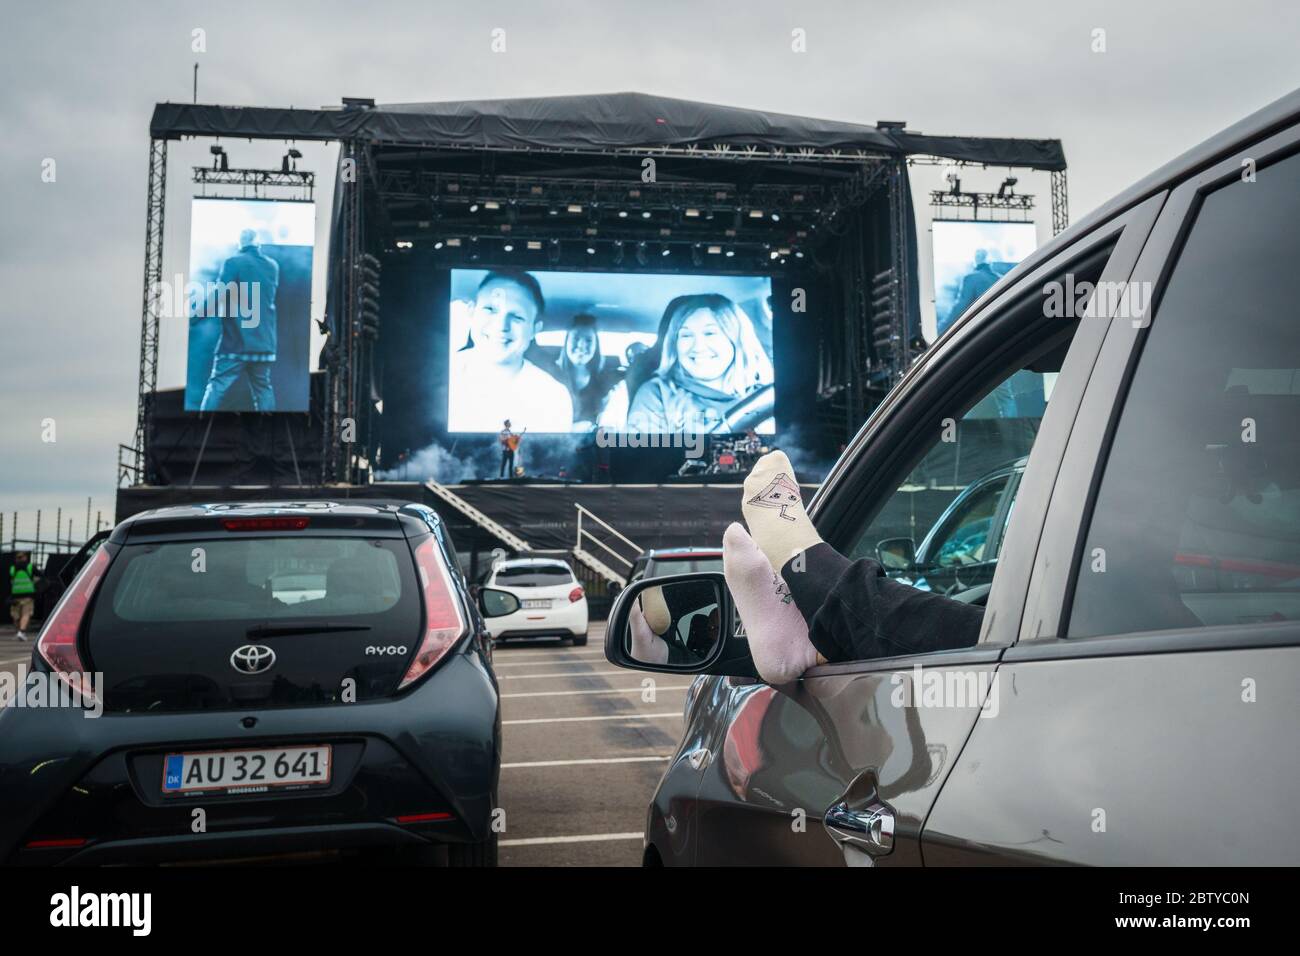 Copenhagen, Denmark. 27th May, 2020. The Danish rapper L.O.C. performs a live drive-in concert at the parking area outside Copenhagen Airport Kastrup. Due to the Corona virus and the lockdown of Denmark, the concert was organized as a drive-in concert where the audience watch the concert from their cars and with the audio streaming out of car radios. (Photo Credit: Gonzales Photo/Rod Clemen/Alamy Live News). Stock Photo